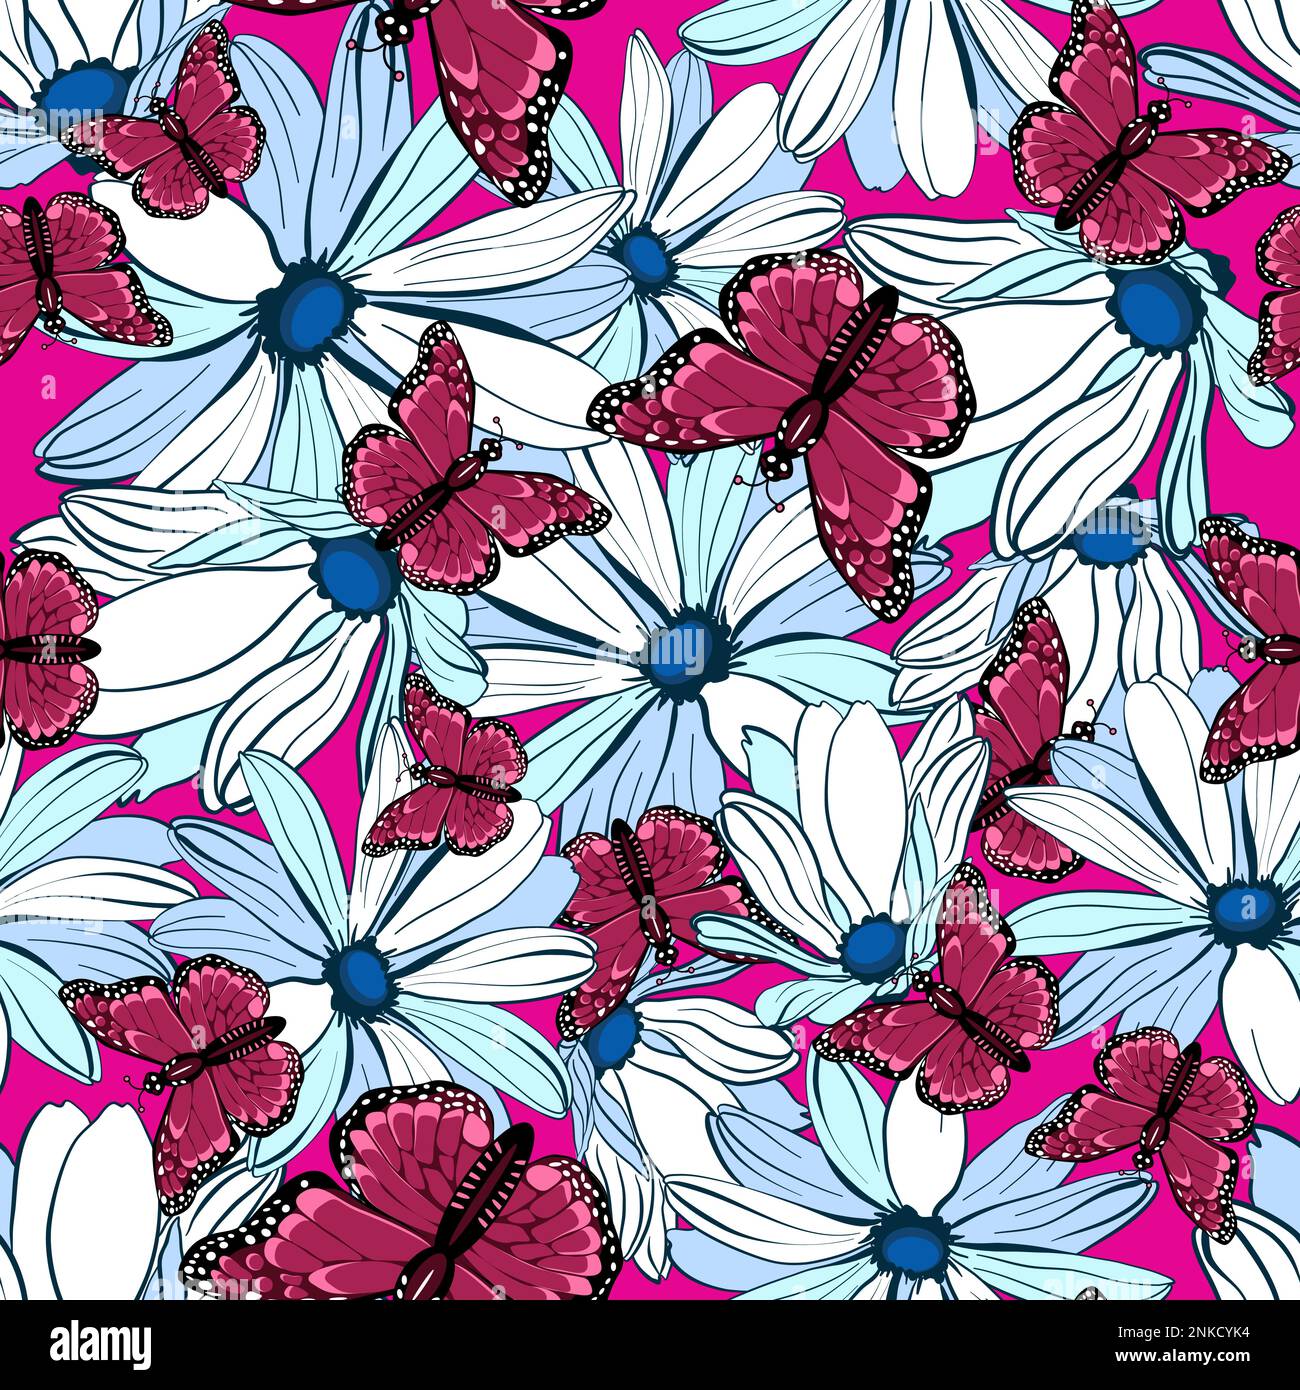 Seamless floral pattern with magenta monarch butterflies in daisy flowers vector illustration Stock Vector